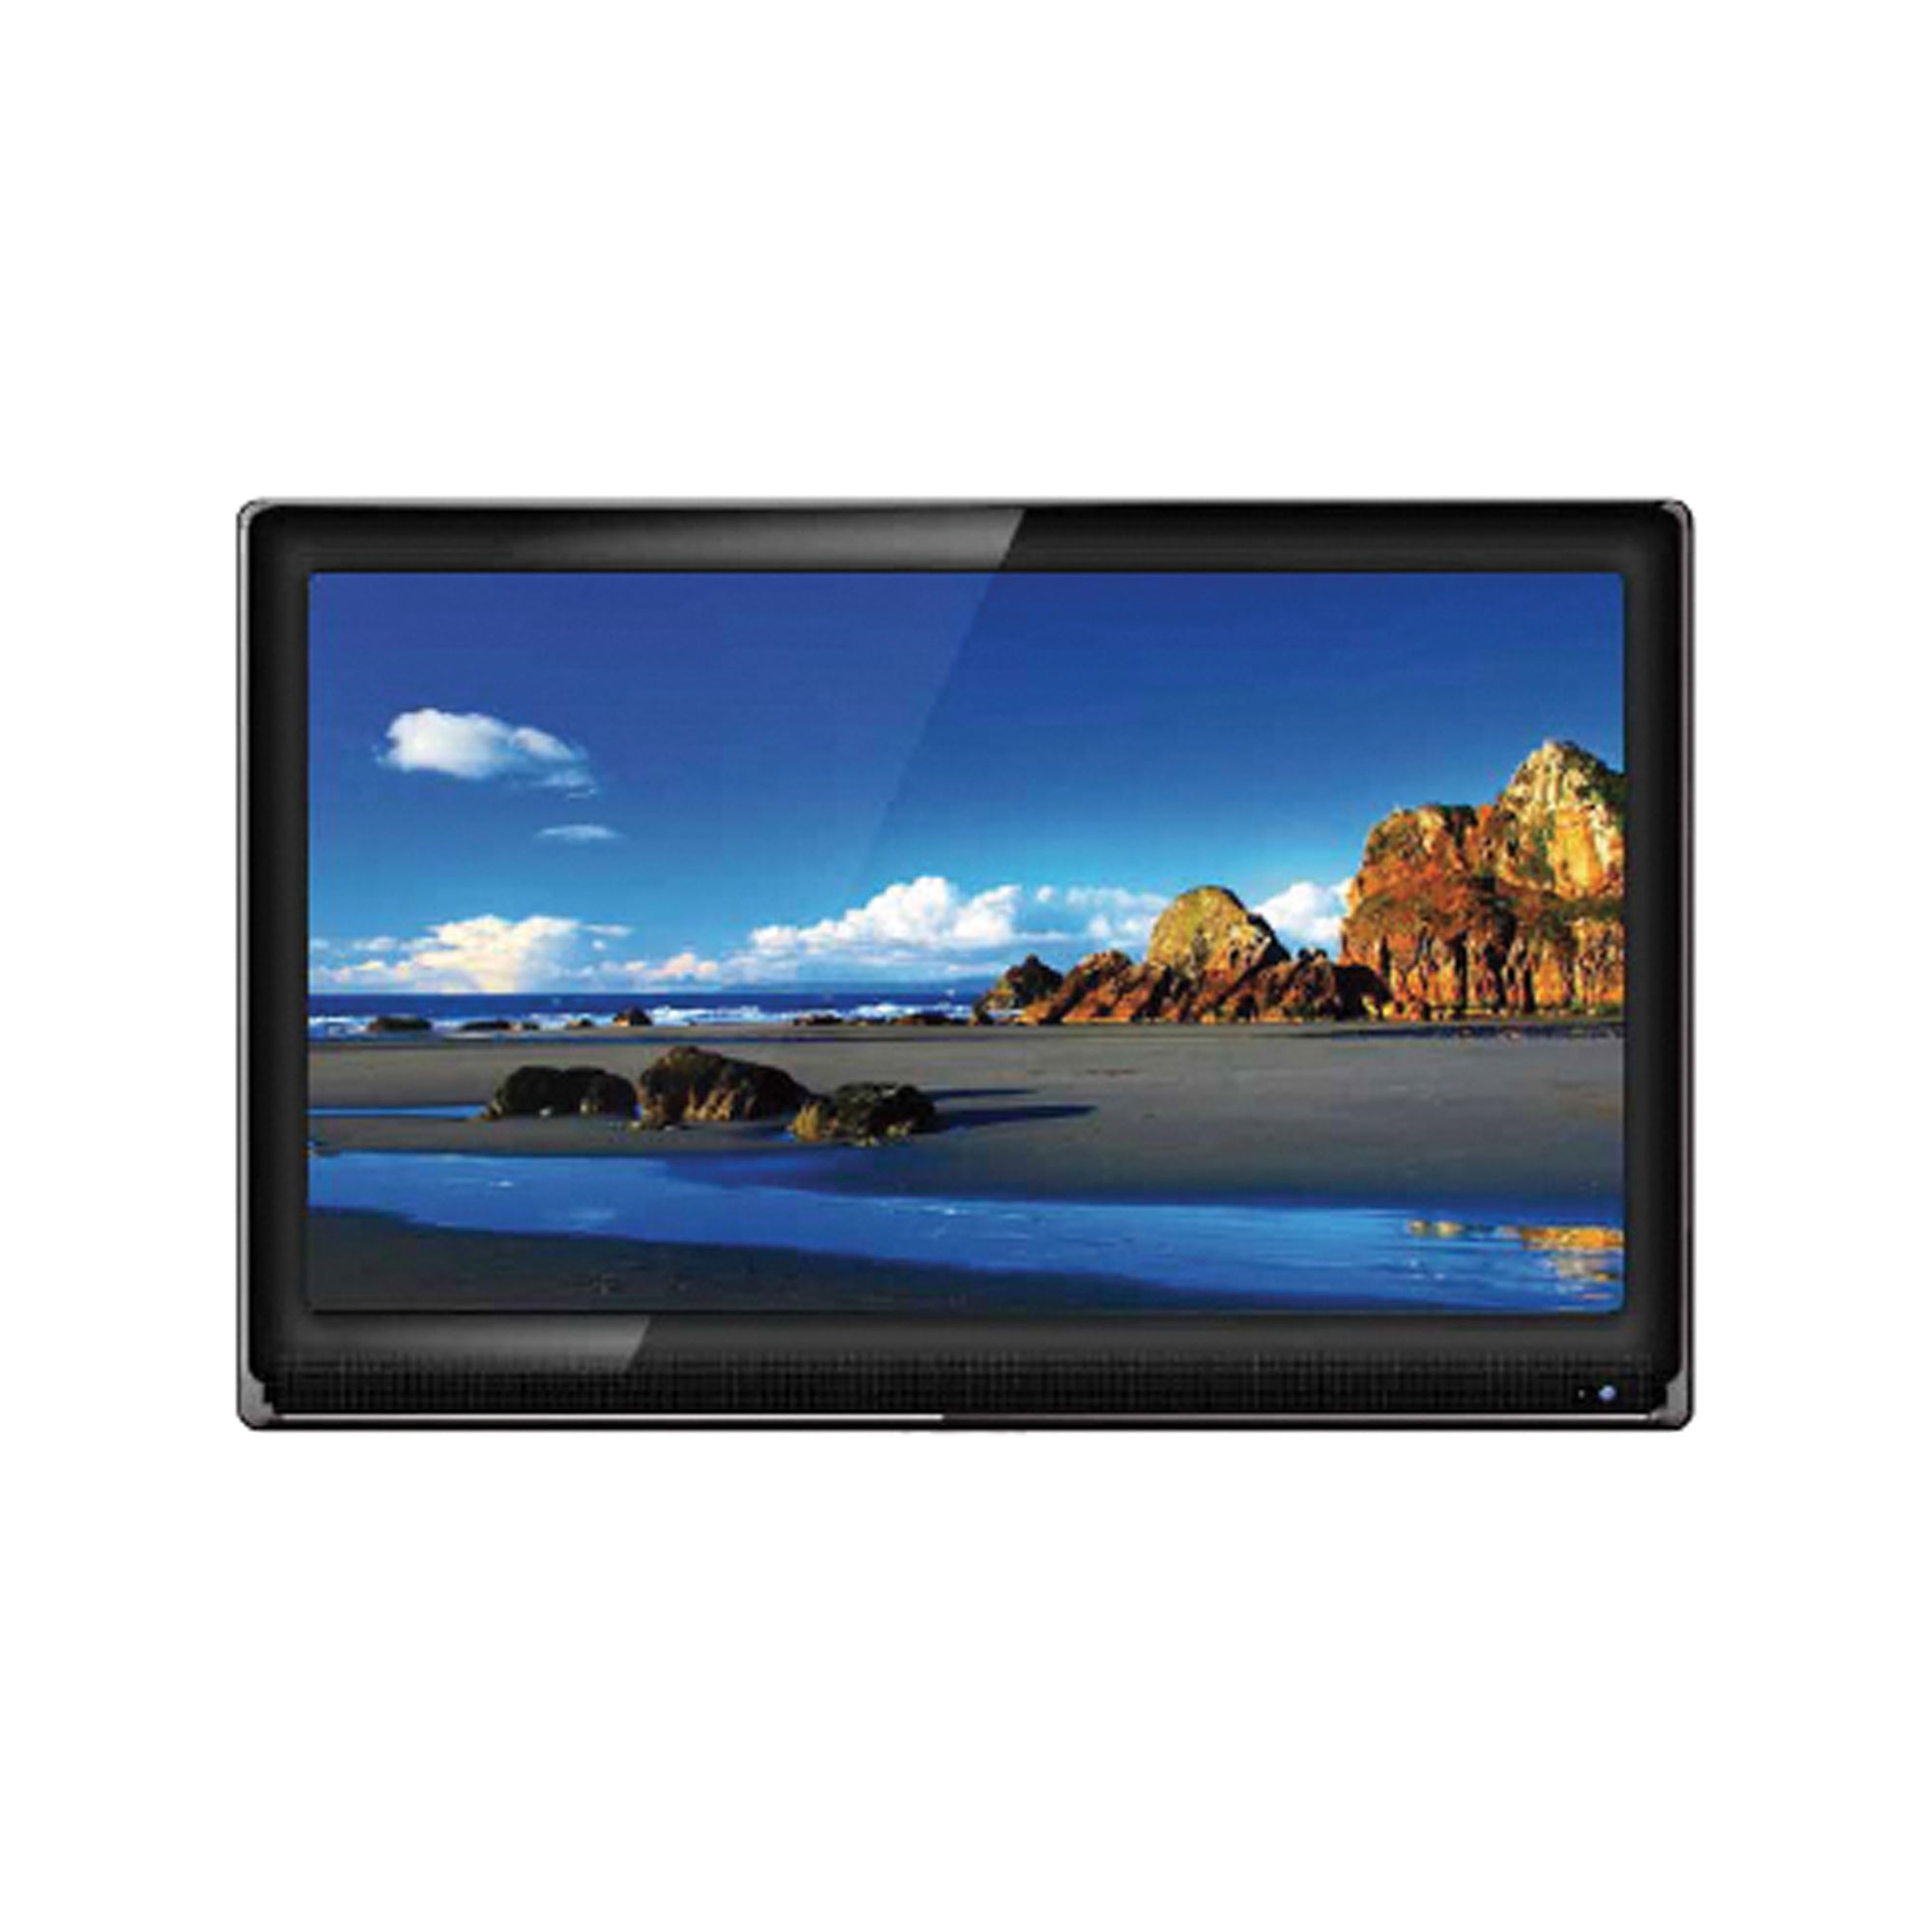 Furrion 2021123777 HD LED TV with Stand and Universal Remote - 39"